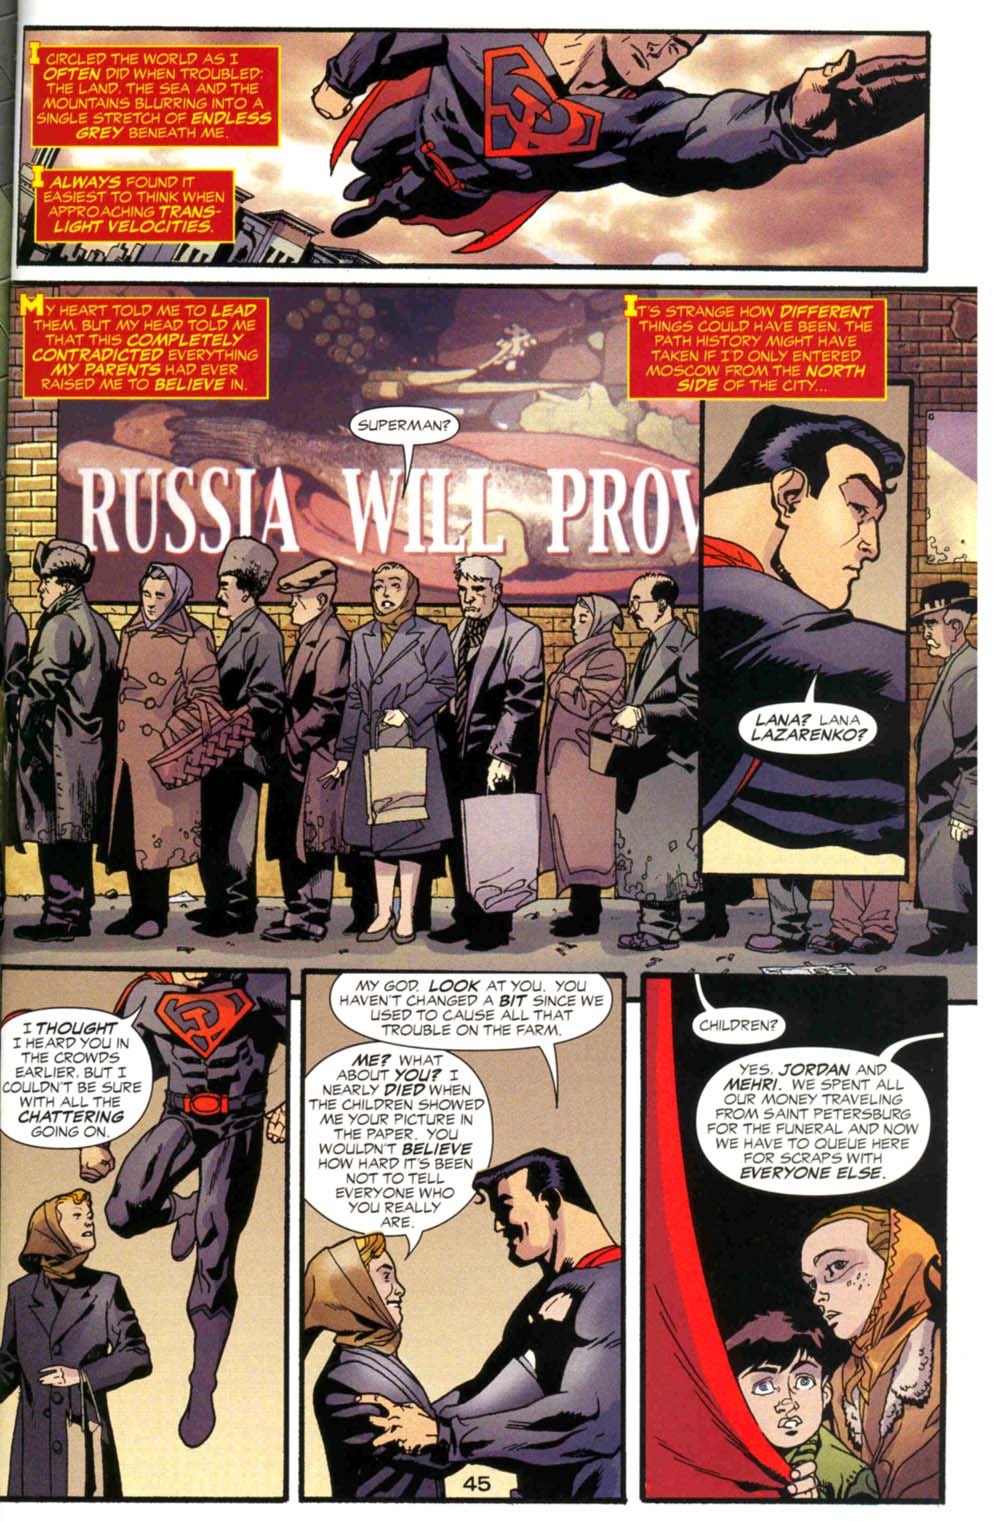 SUPERMAN: RED SON 1